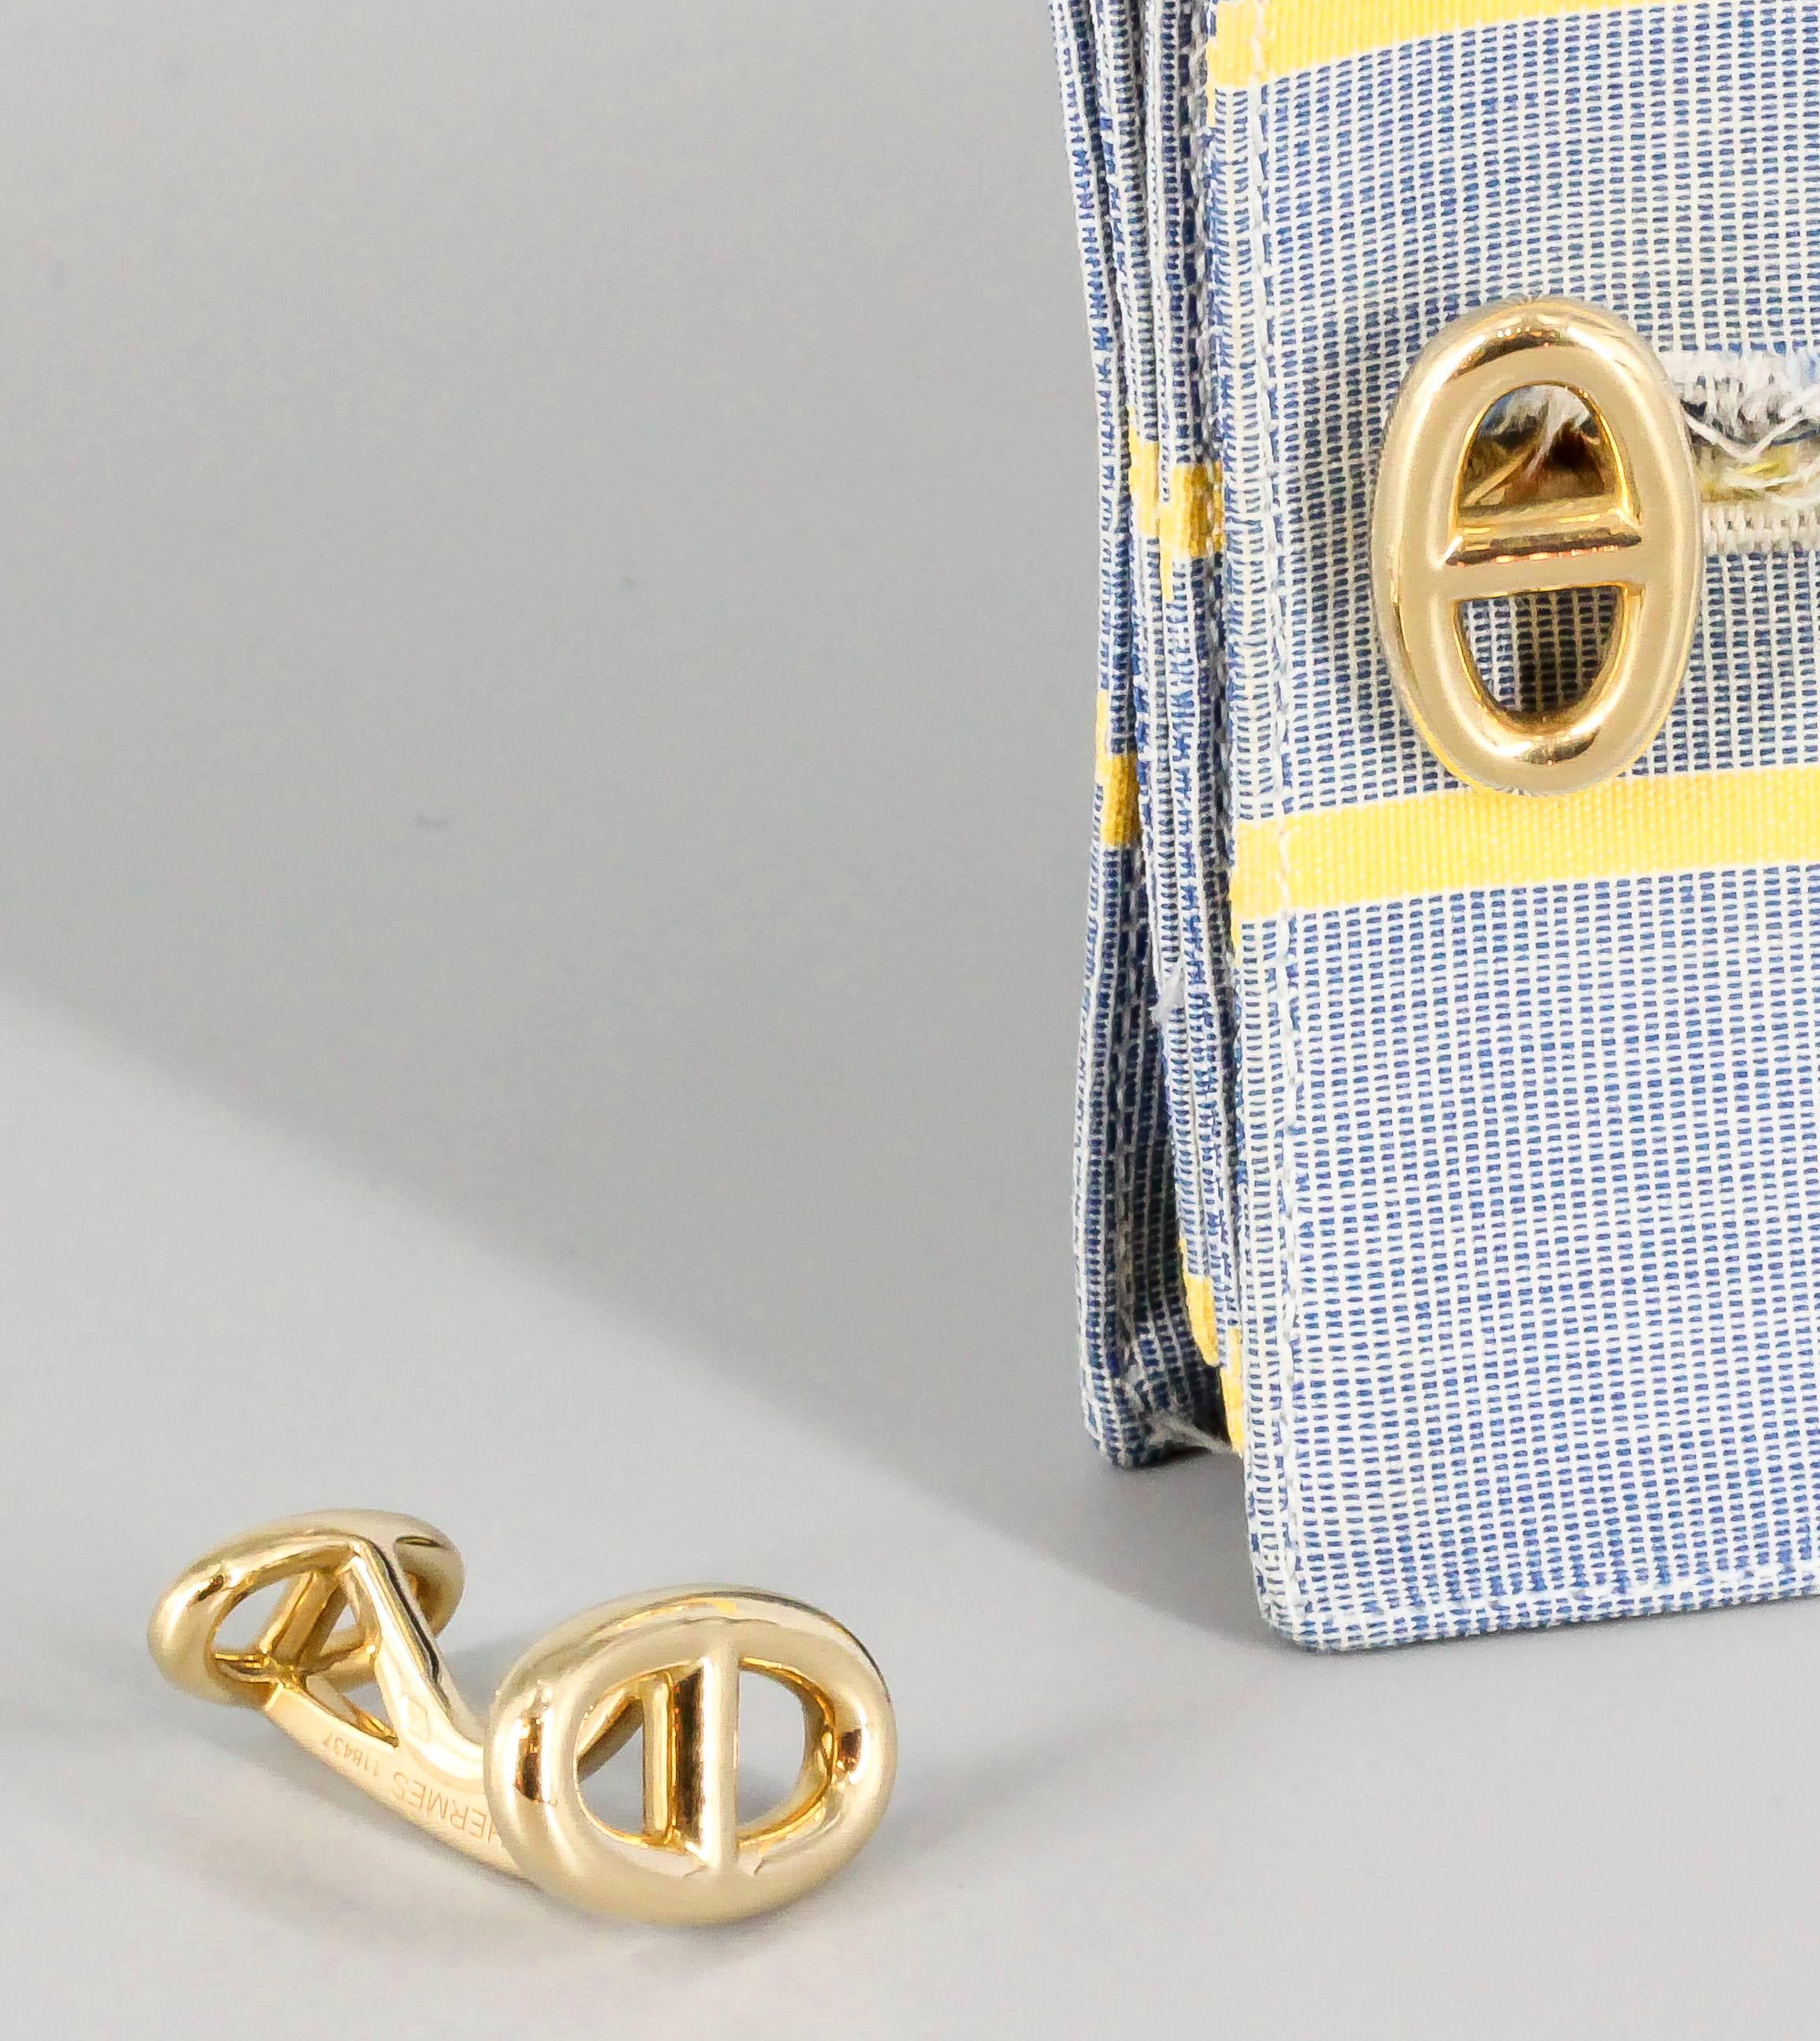 Handsome 18K yellow gold cufflinks from the 